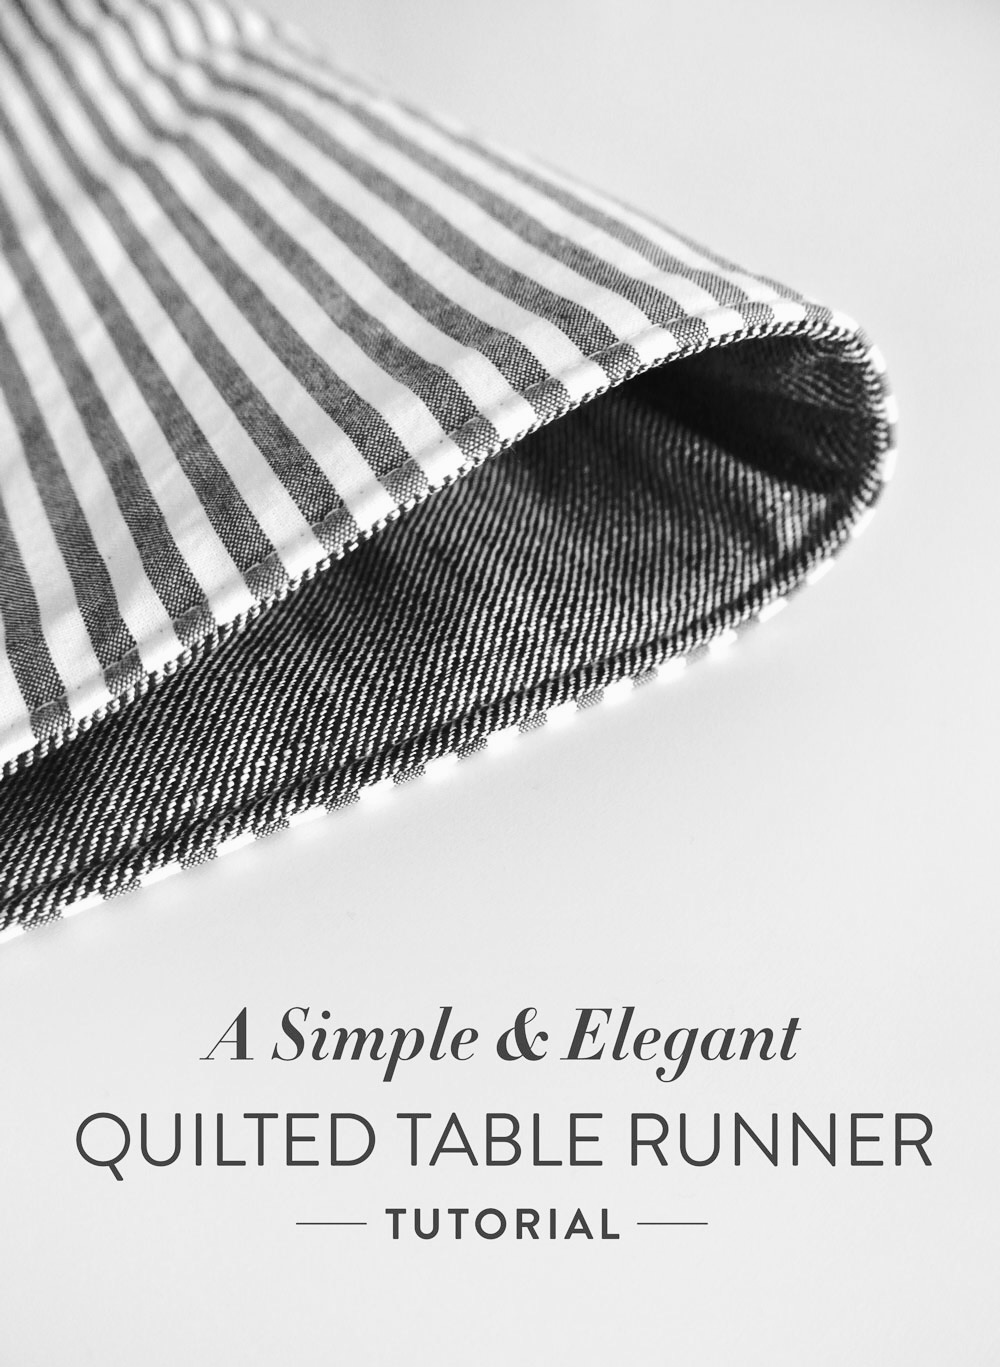 A Simple and Elegant Quilted Table Runner Tutorial Hand Quilting | Suzy Quilts https://suzyquilts.com/quilted-table-runner-tutorial